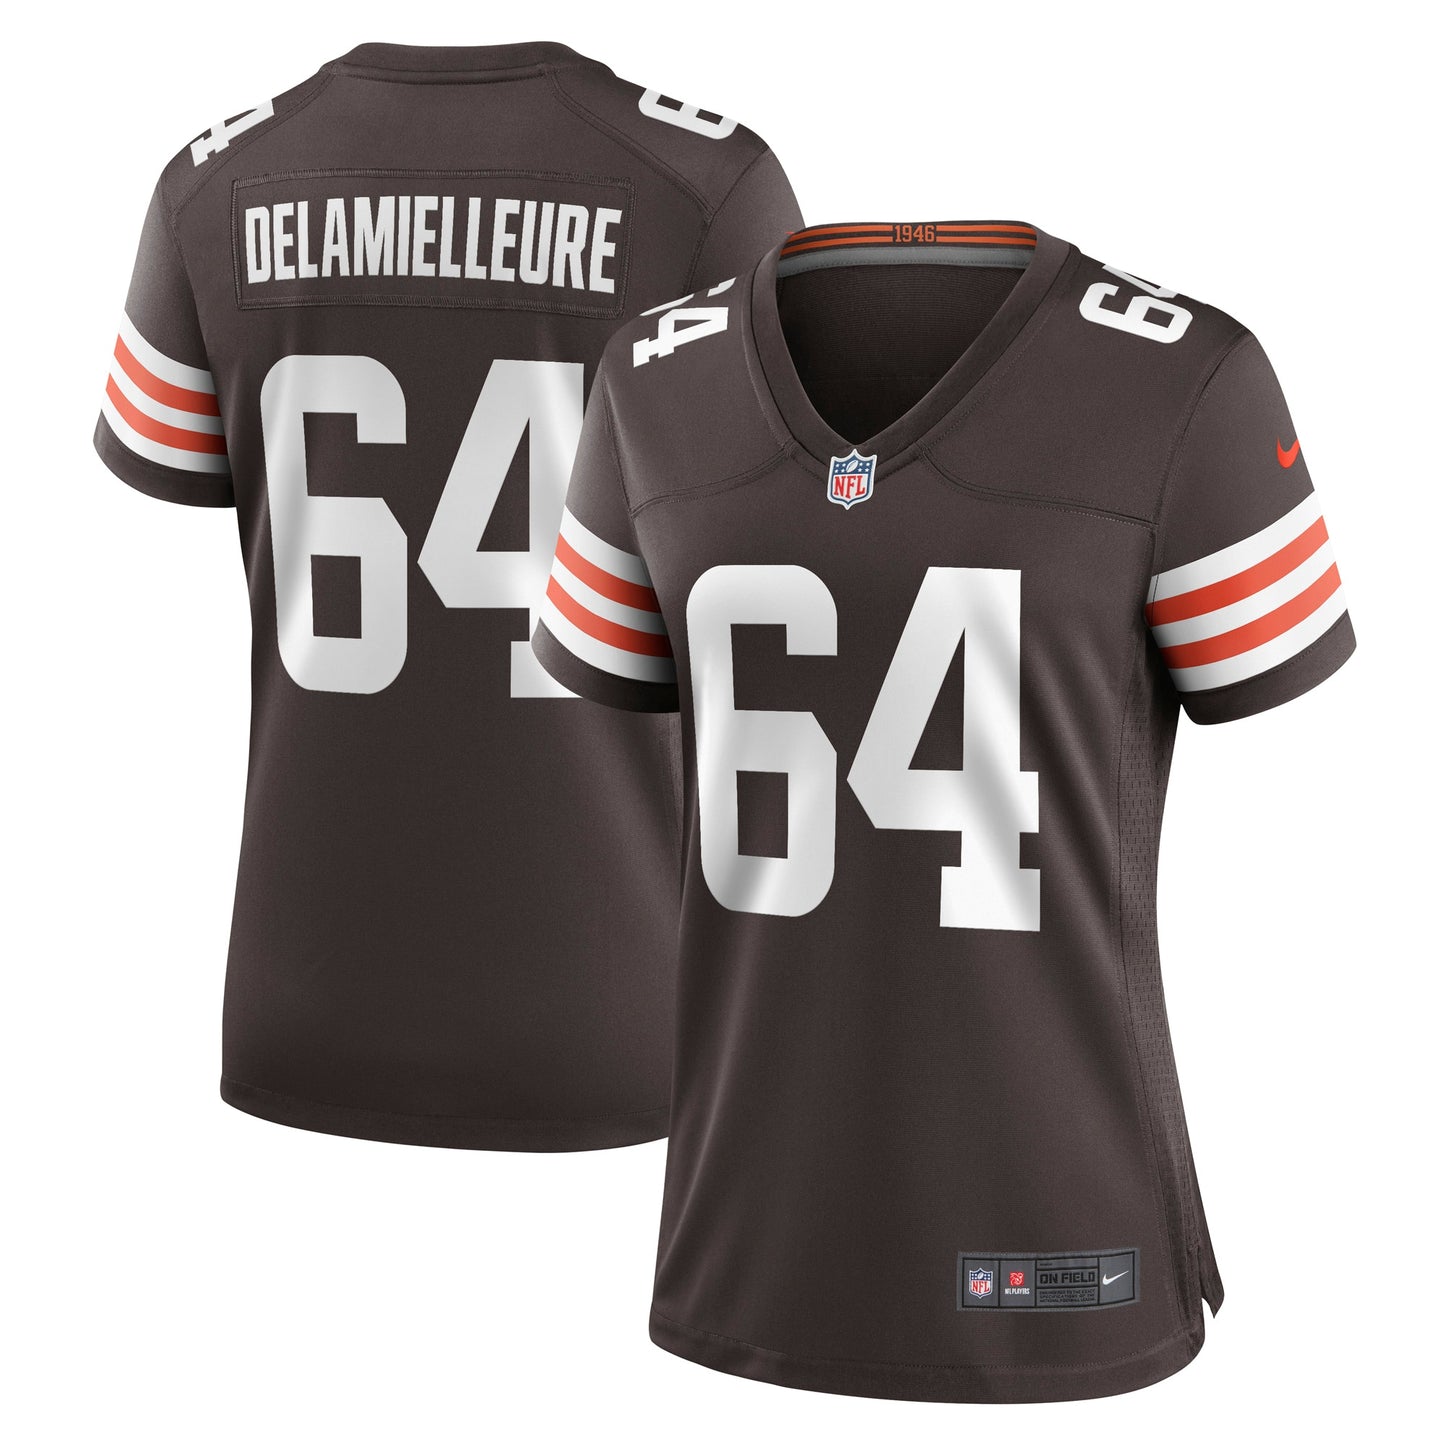 Joe DeLamielleure Cleveland Browns Nike Women's Game Retired Player Jersey - Brown